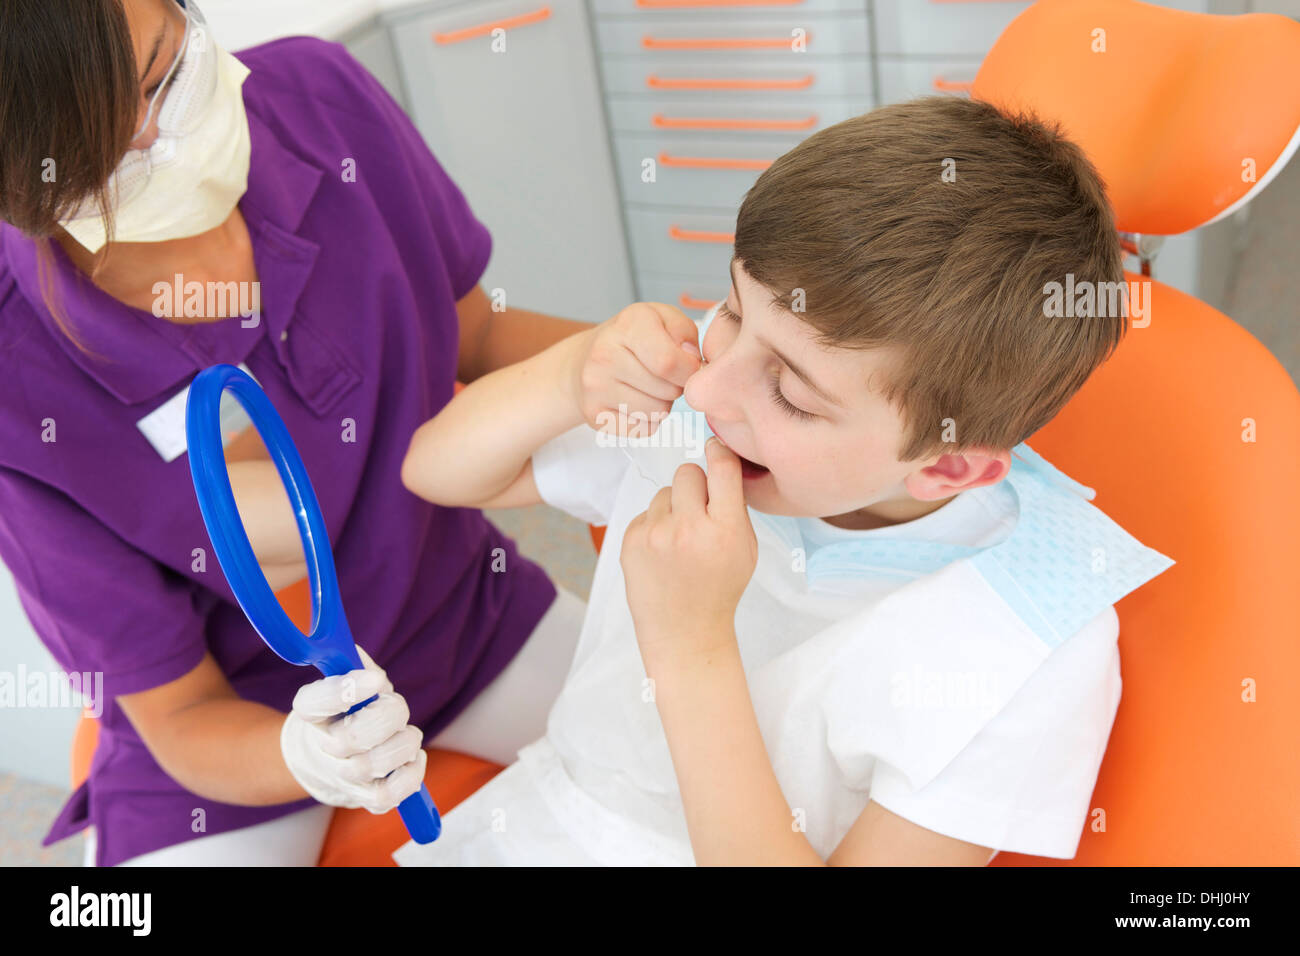 Dental hygienist holding hand mirror while patient flosses Stock Photo